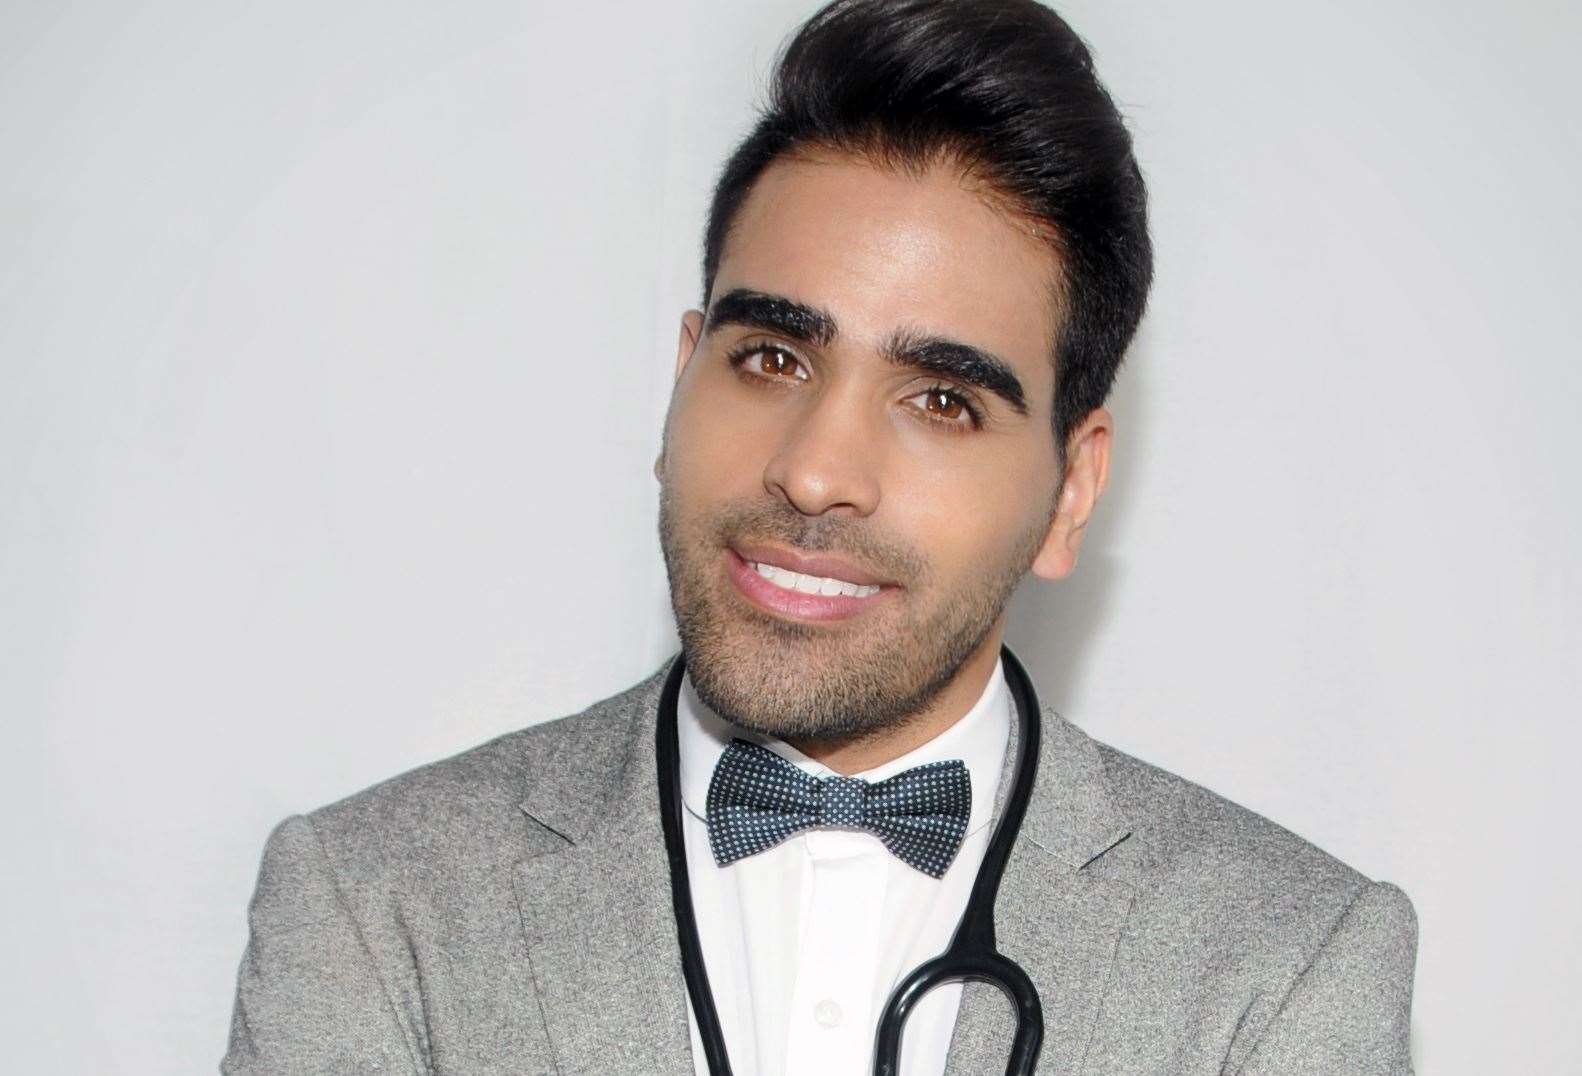 Dr Ranj will present a Get Well Soon special